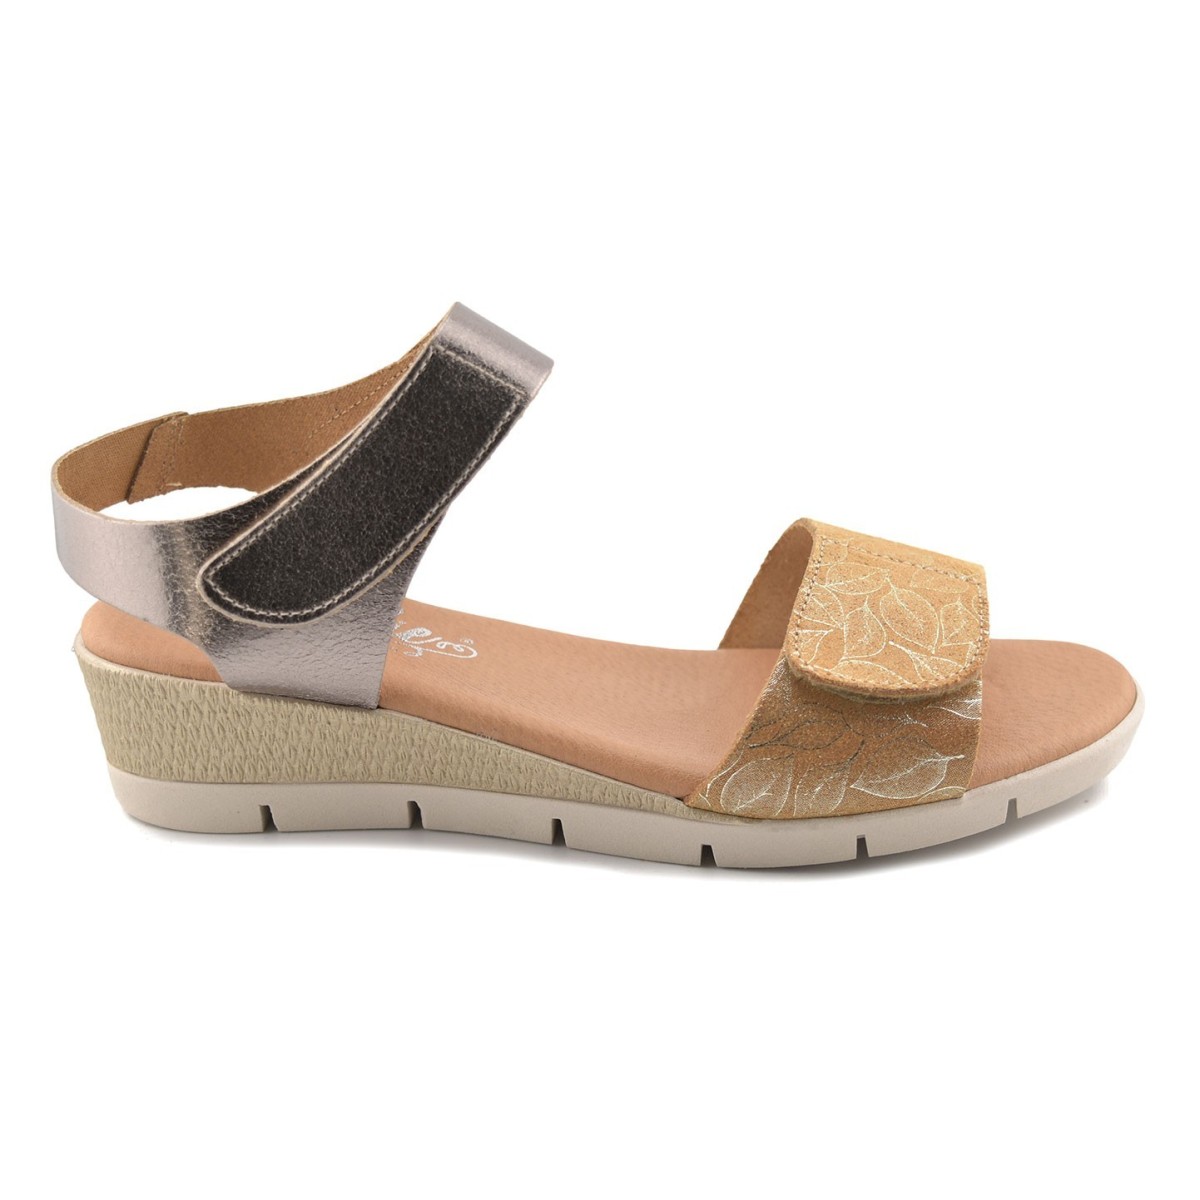 Beige leather wedge sandals by Amelie